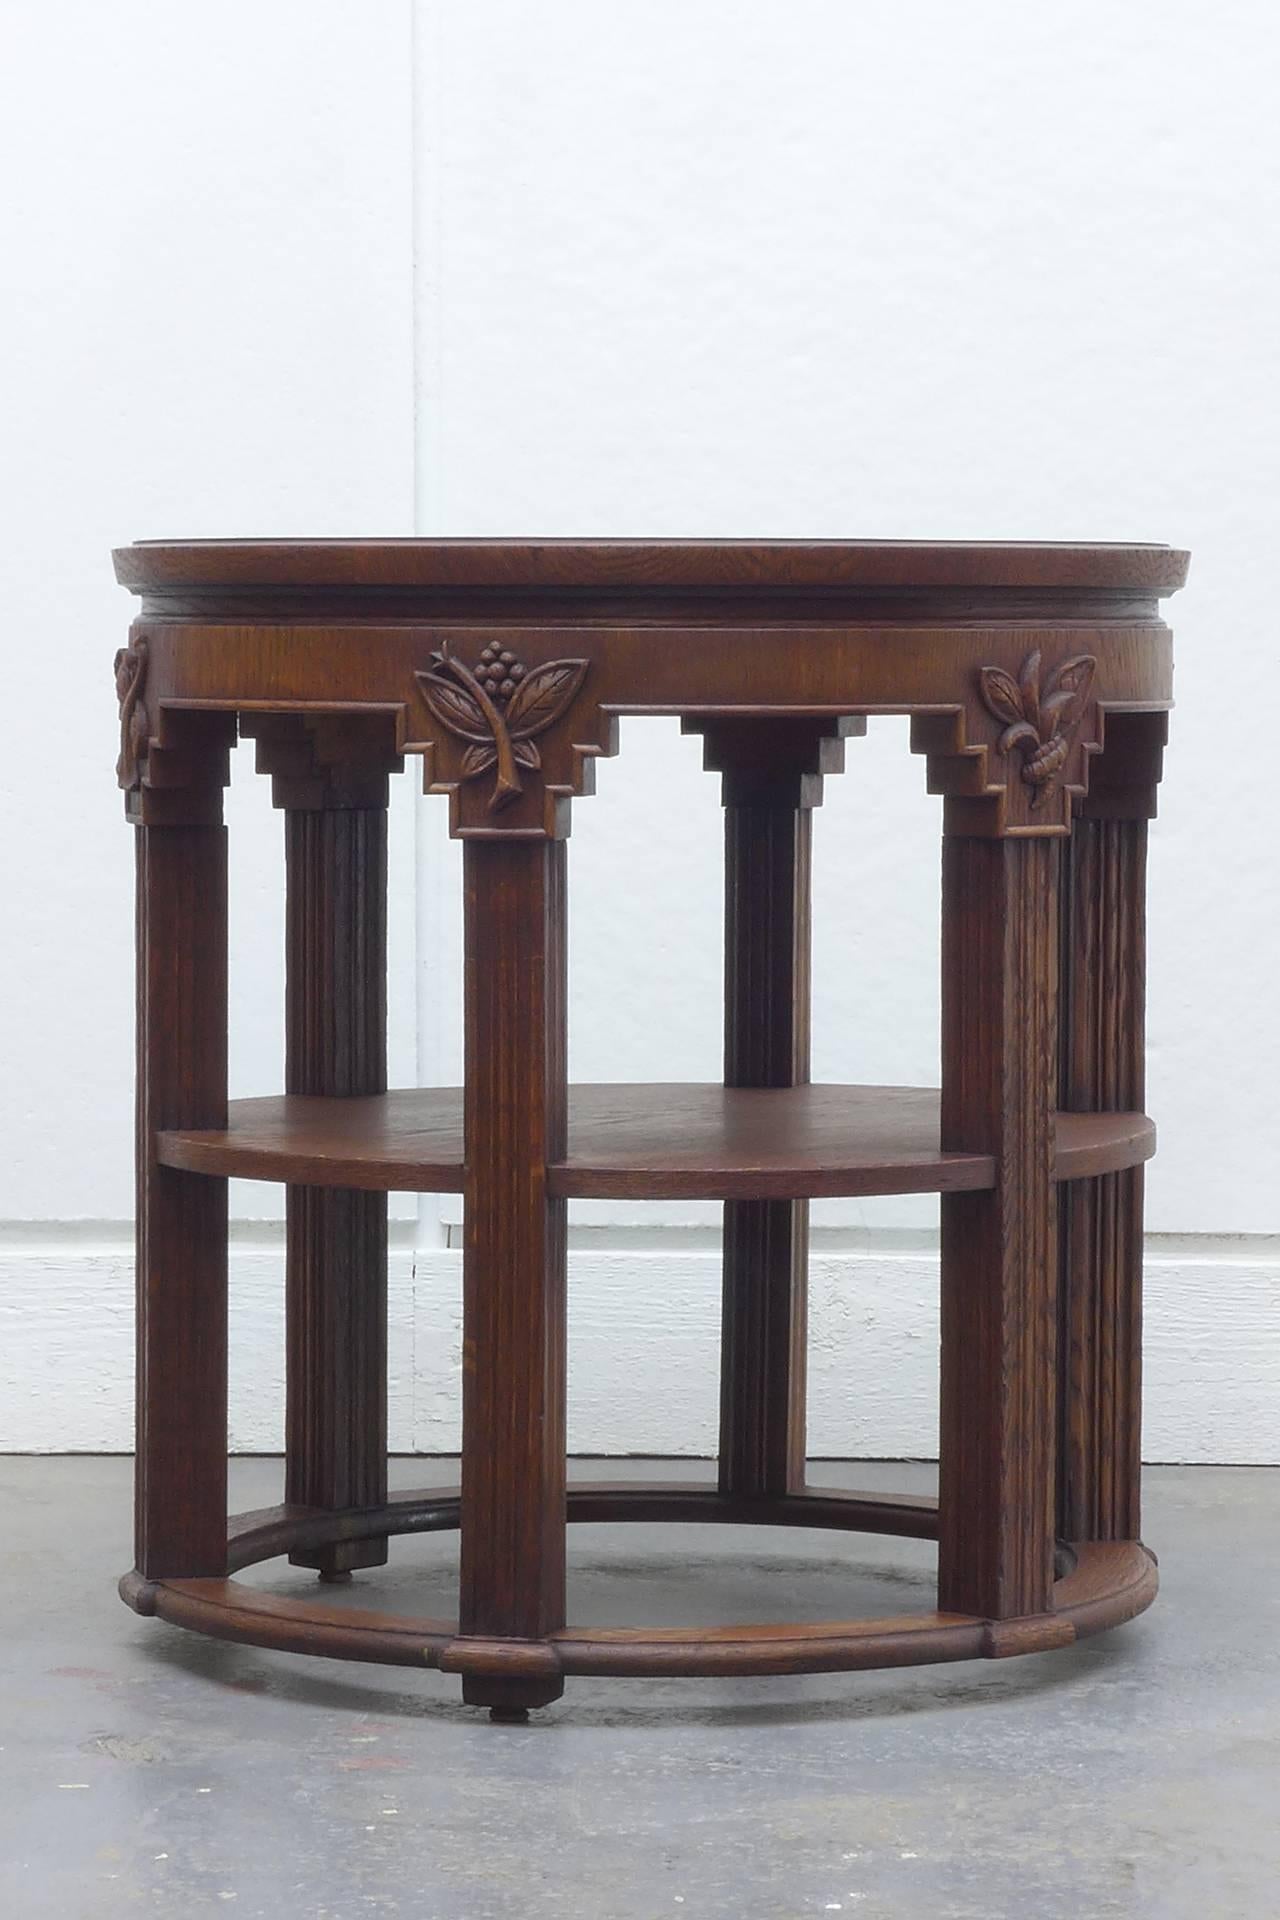 German expressionist oak side table. The two tiers resting on six fluted legs.